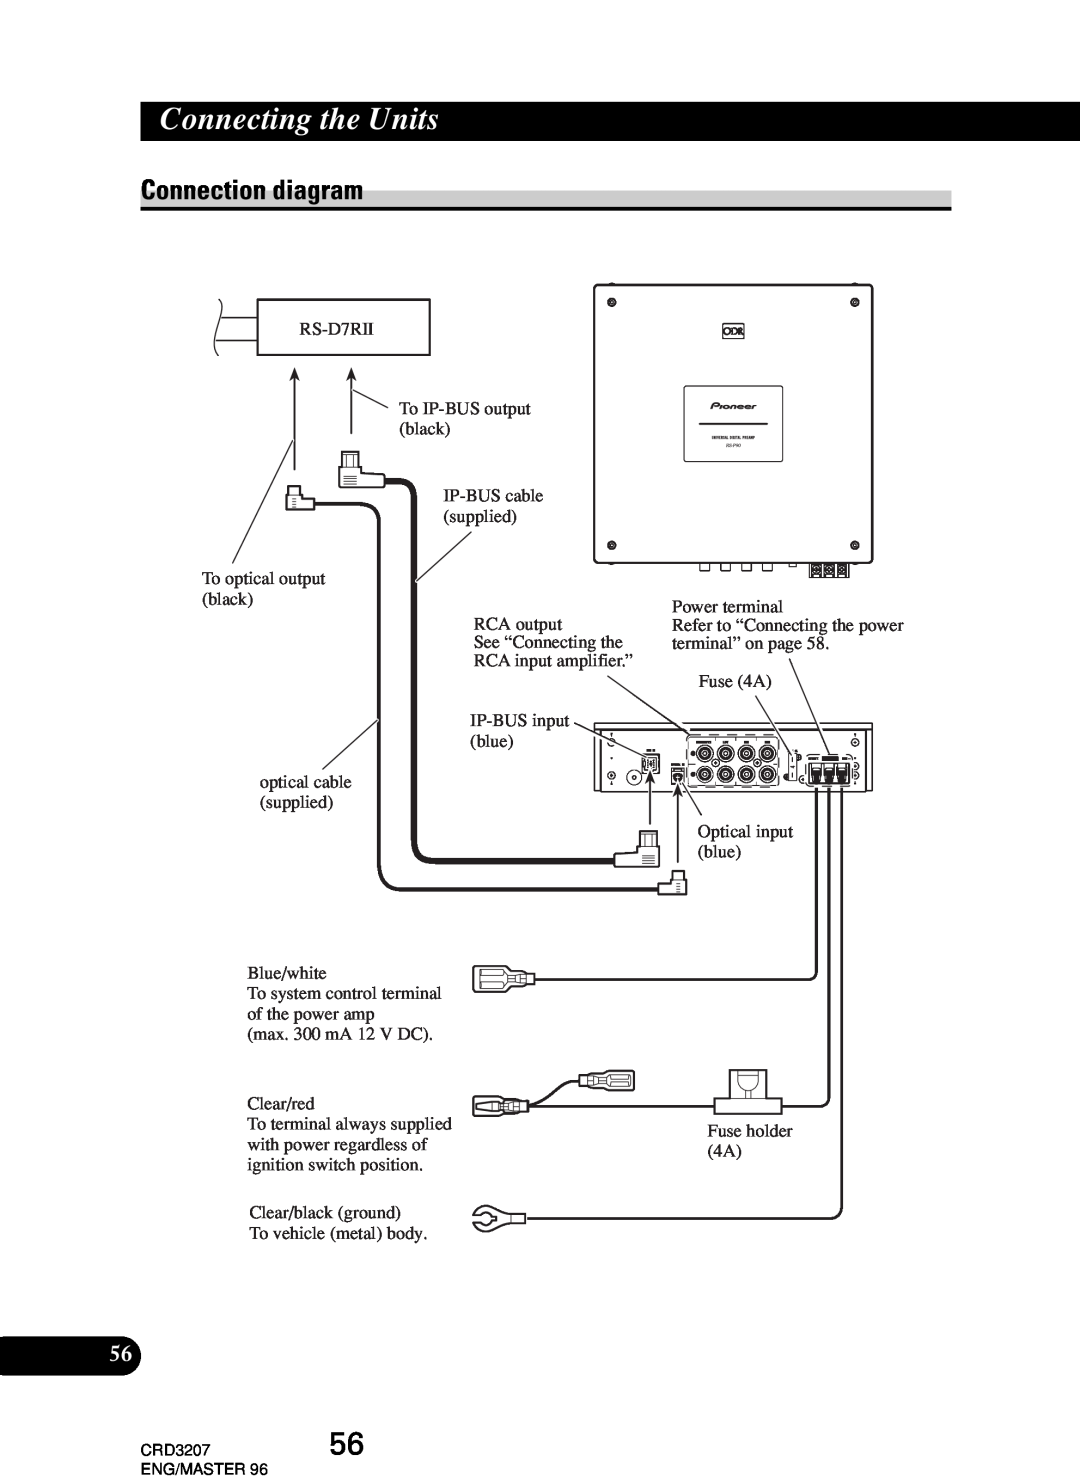 Pioneer RS-P90, RS-D7R owner manual Connection diagram, Connecting the Units 